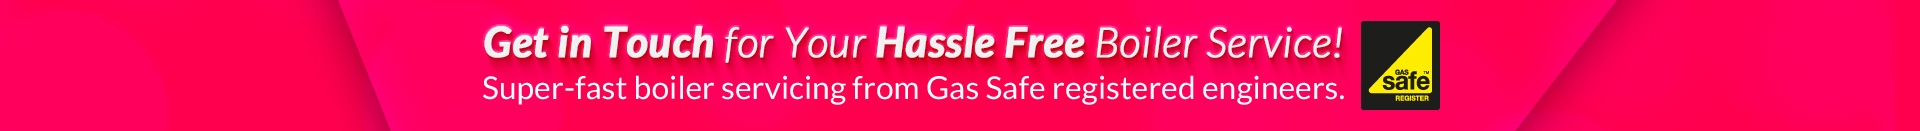 Hassle Free Boiler Services